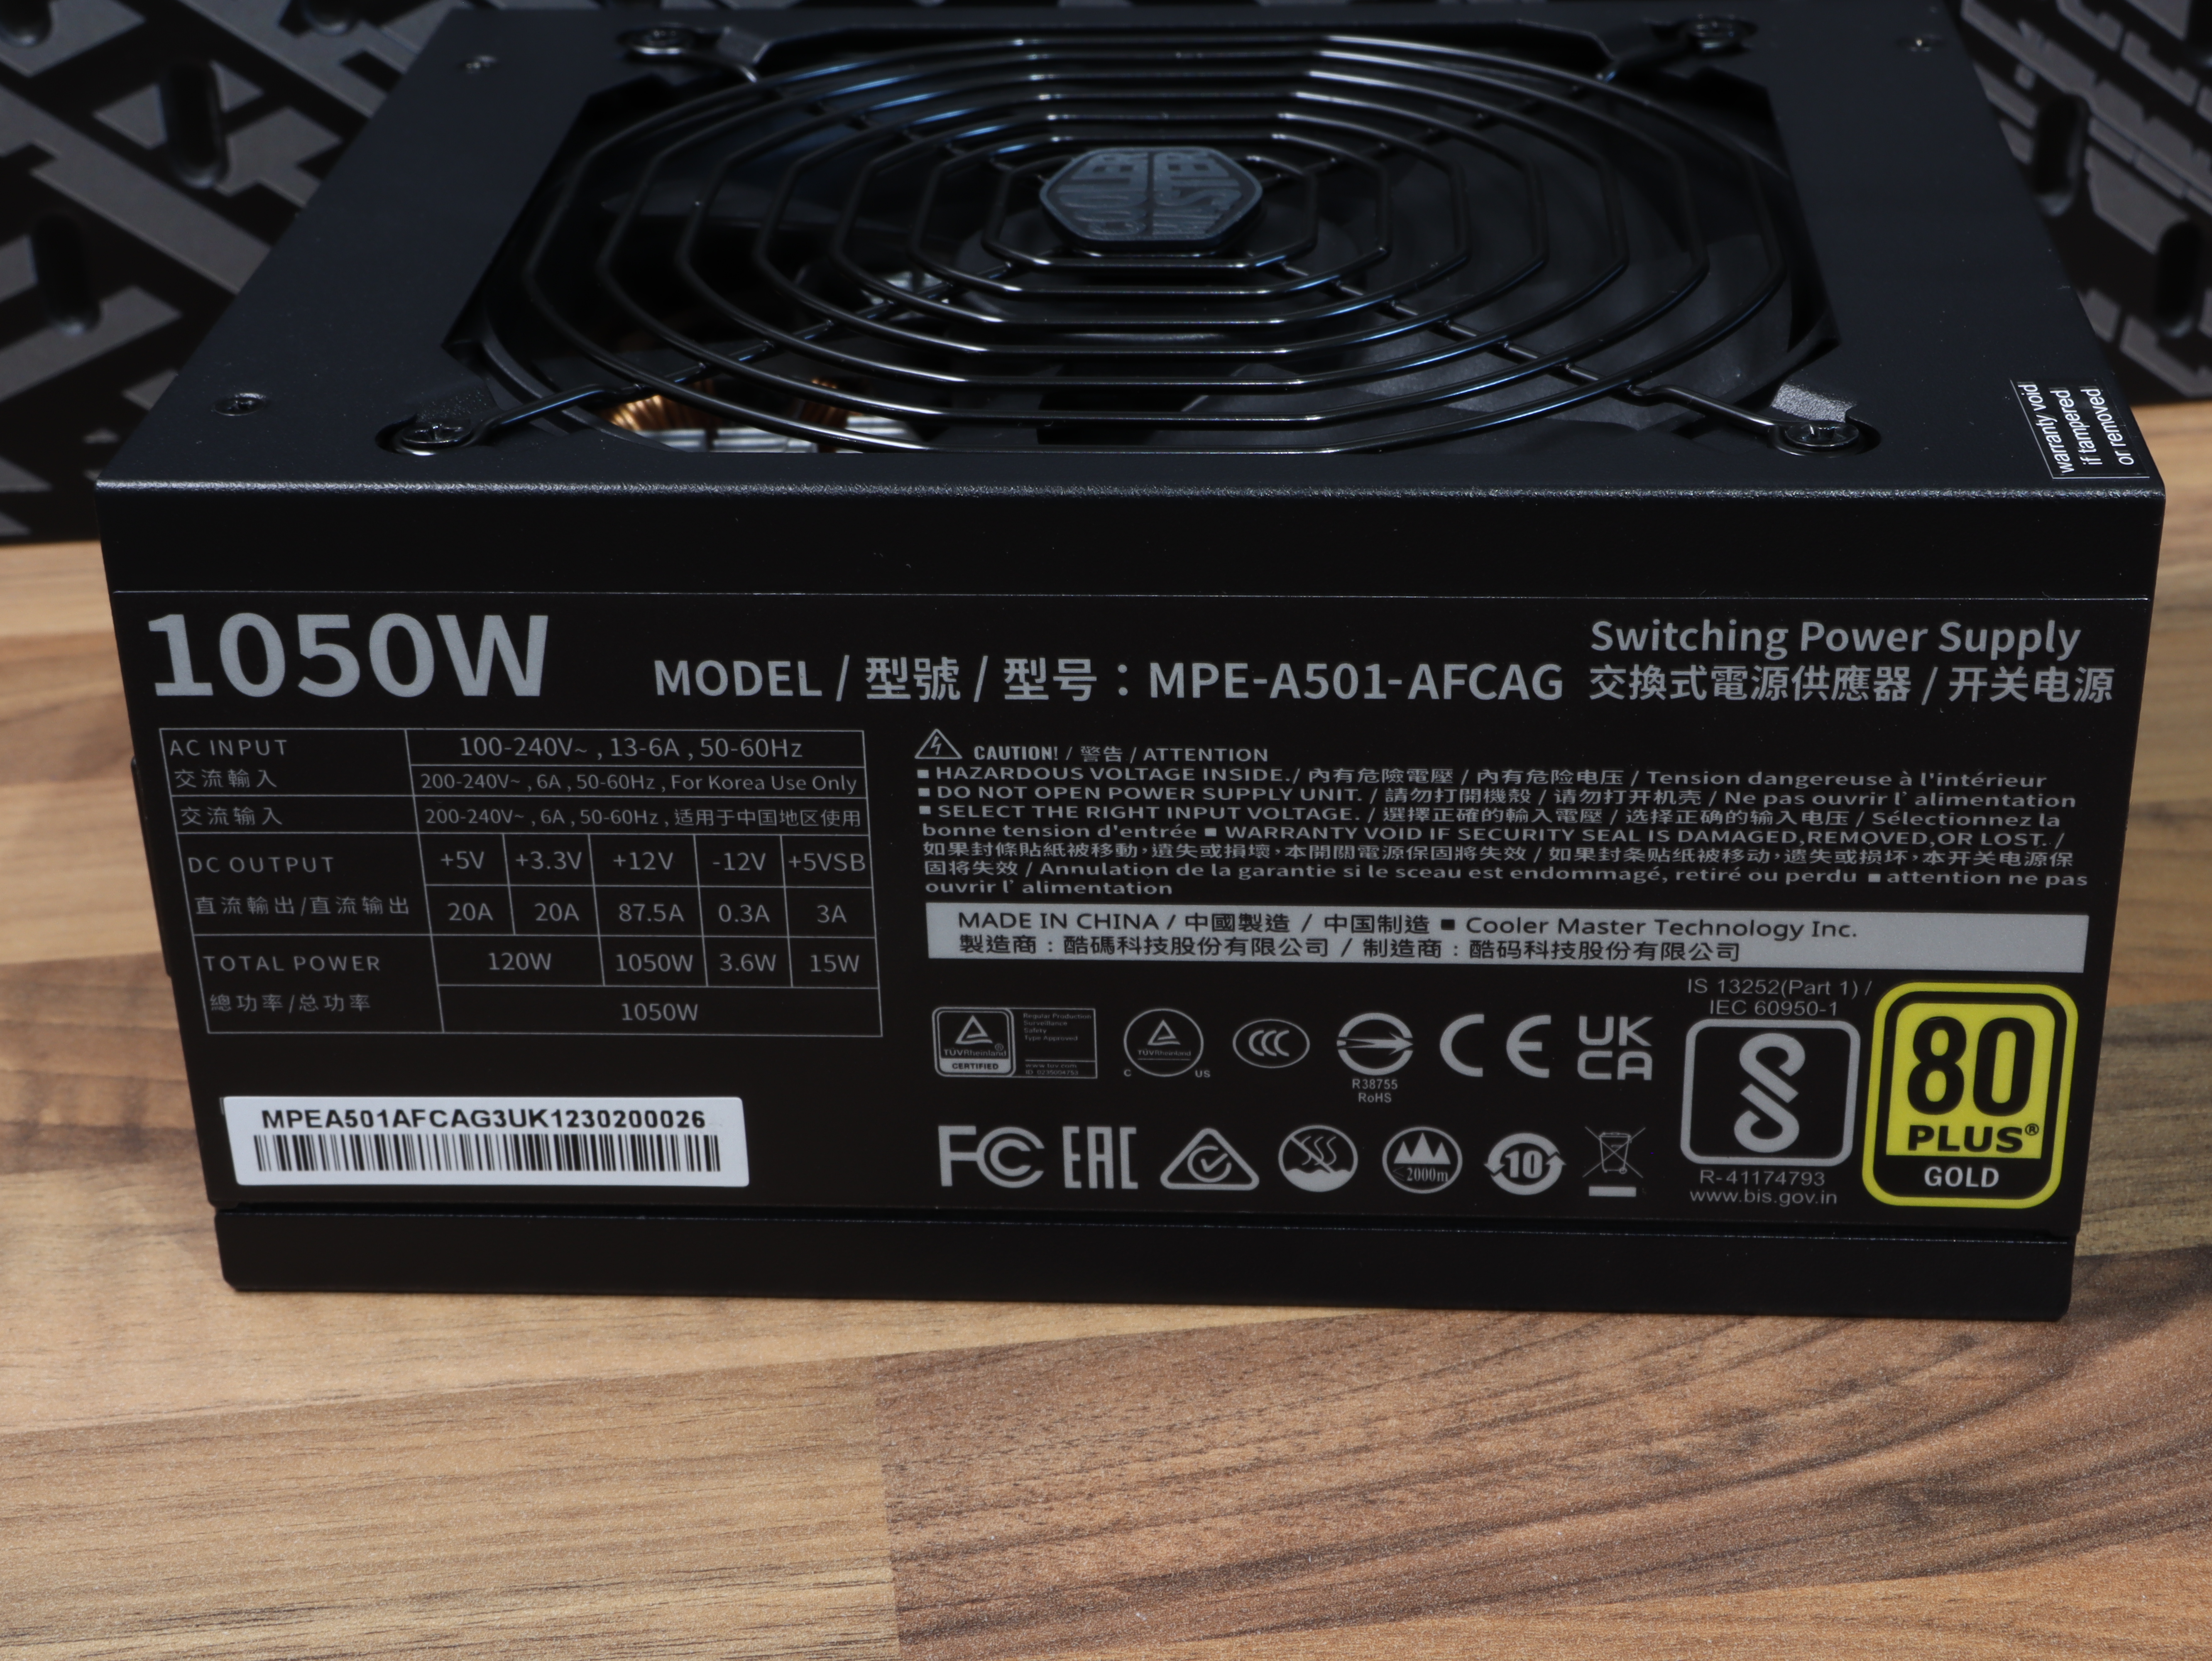 1050 NDUSTRIAL-GRADE 80 ATX FULLY PLUS GOLD COOLING 3.0 Cooler Master MODULAR CABLING TEMPERATURE Gold QUIET V2 MWE RESILIENCE.JPG